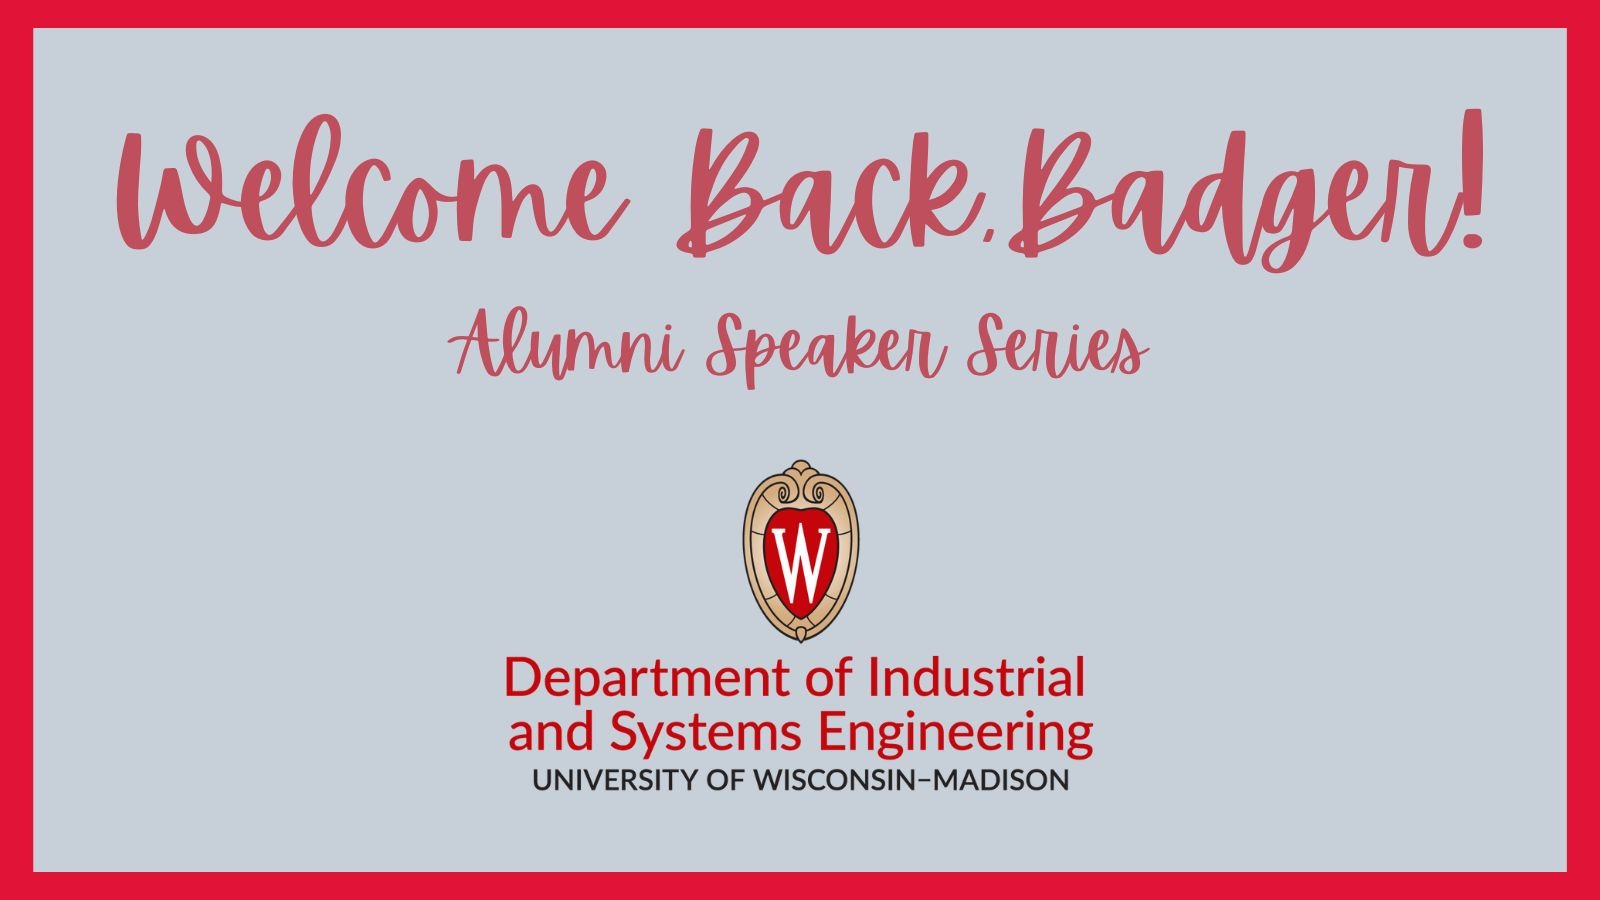 Welcome Back, Badger alumni speaker series with the logo of the University of Wisconsin-Madison Department of Industrial and Systems Engineering logo